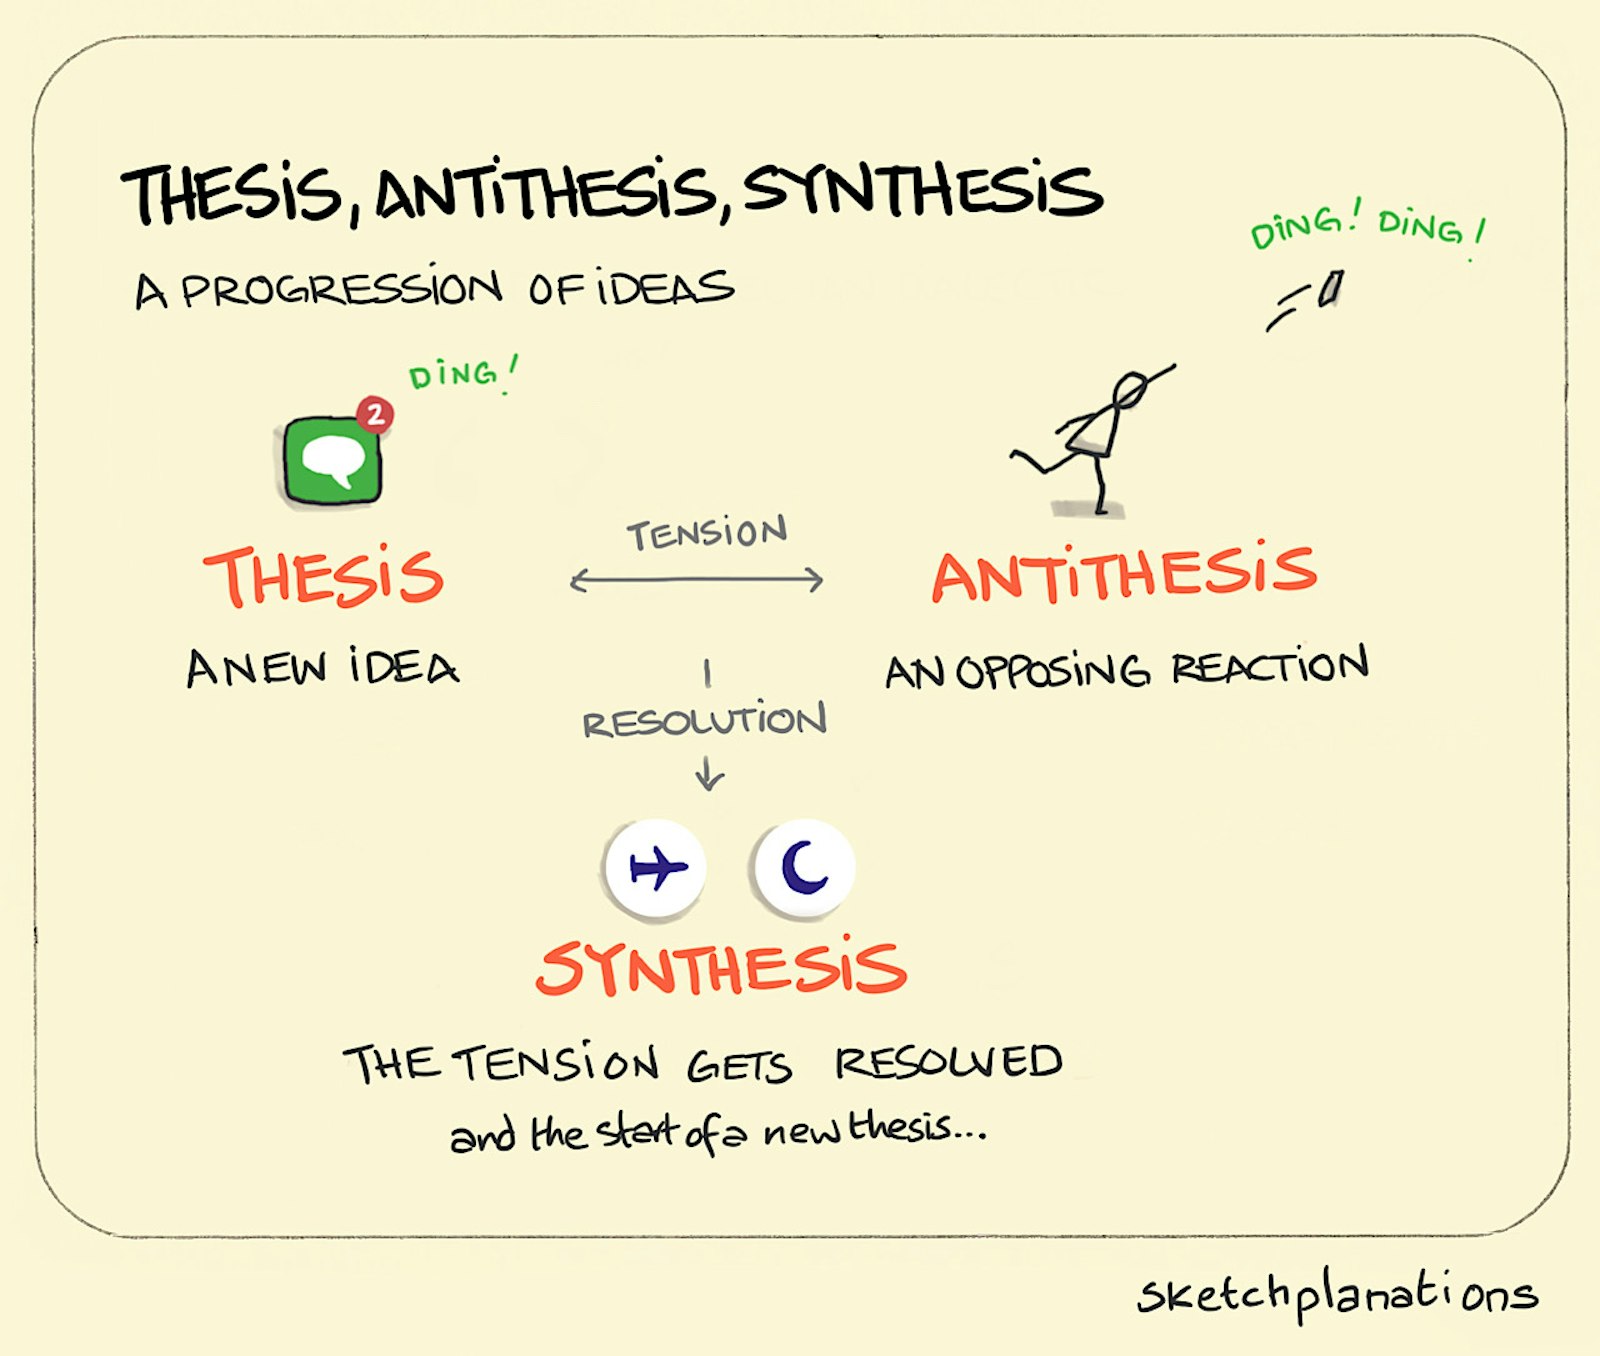 Thesis, antithesis, synthesis - Sketchplanations